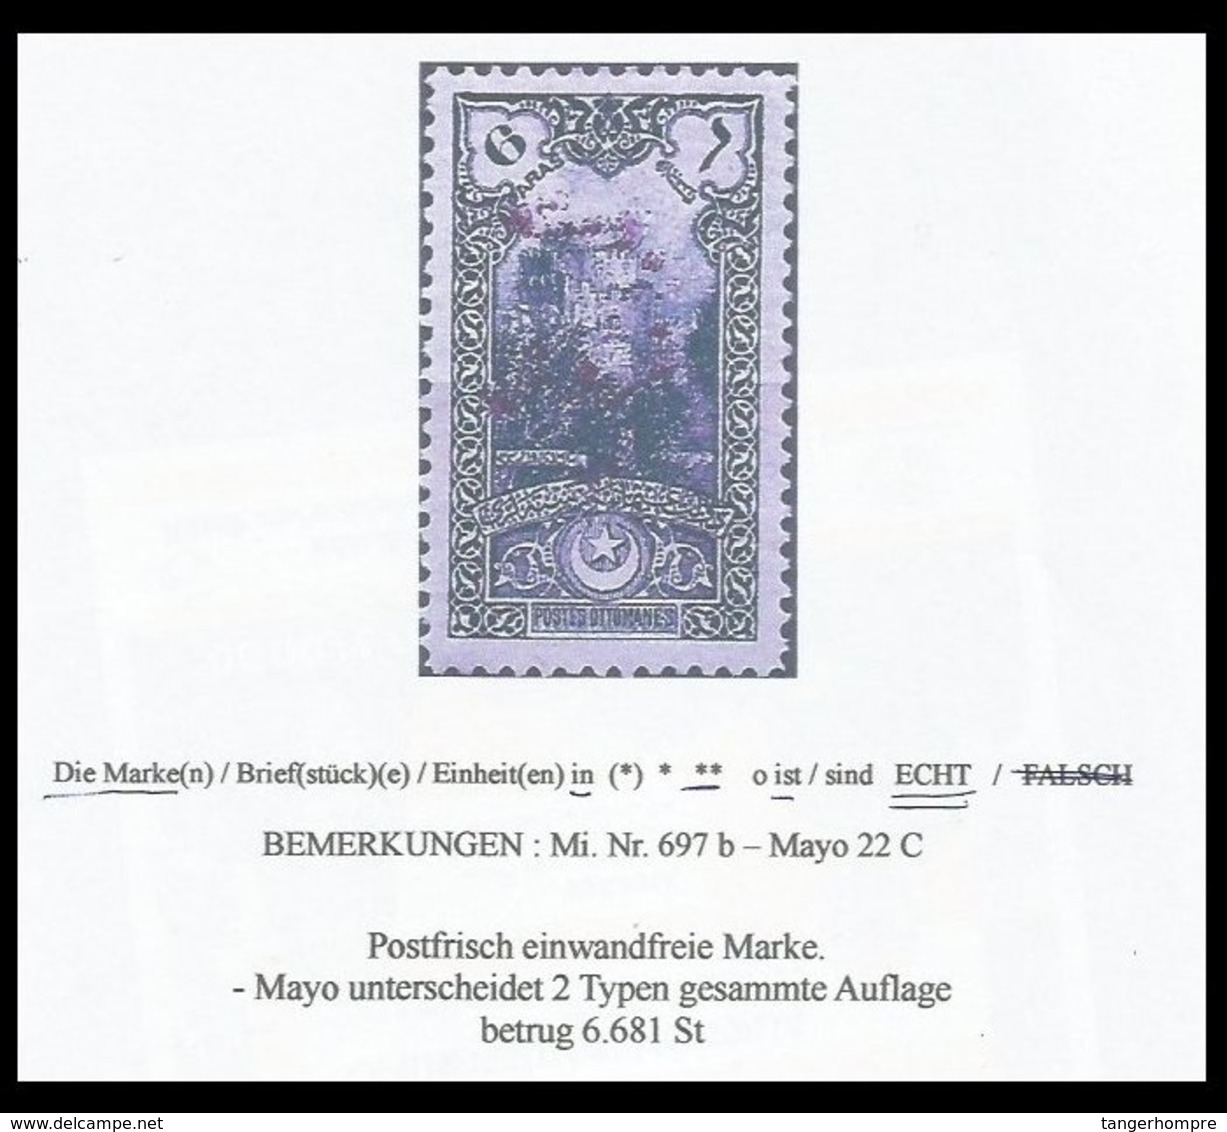 EARLY OTTOMAN SPECIALIZED FOR SPECIALIST, SEE...Mi. Nr. 697 B - Mayo 22 C In Postfrisch - 1920-21 Anatolie